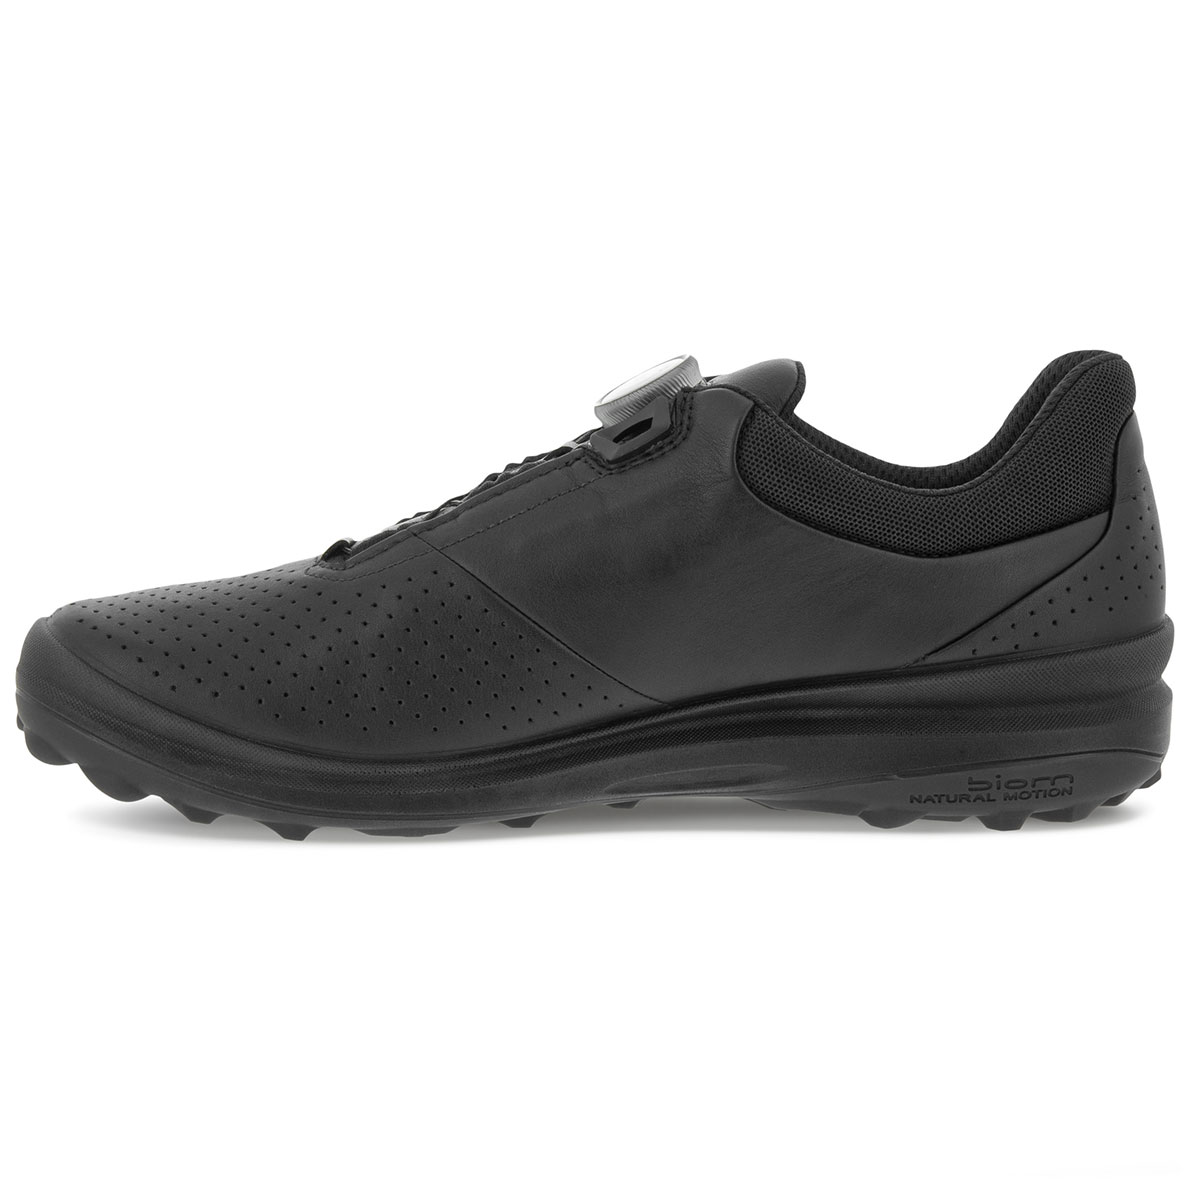 ECCO Men's BIOM BOA Hybrid 3 Spikeless Golf Shoes from american golf